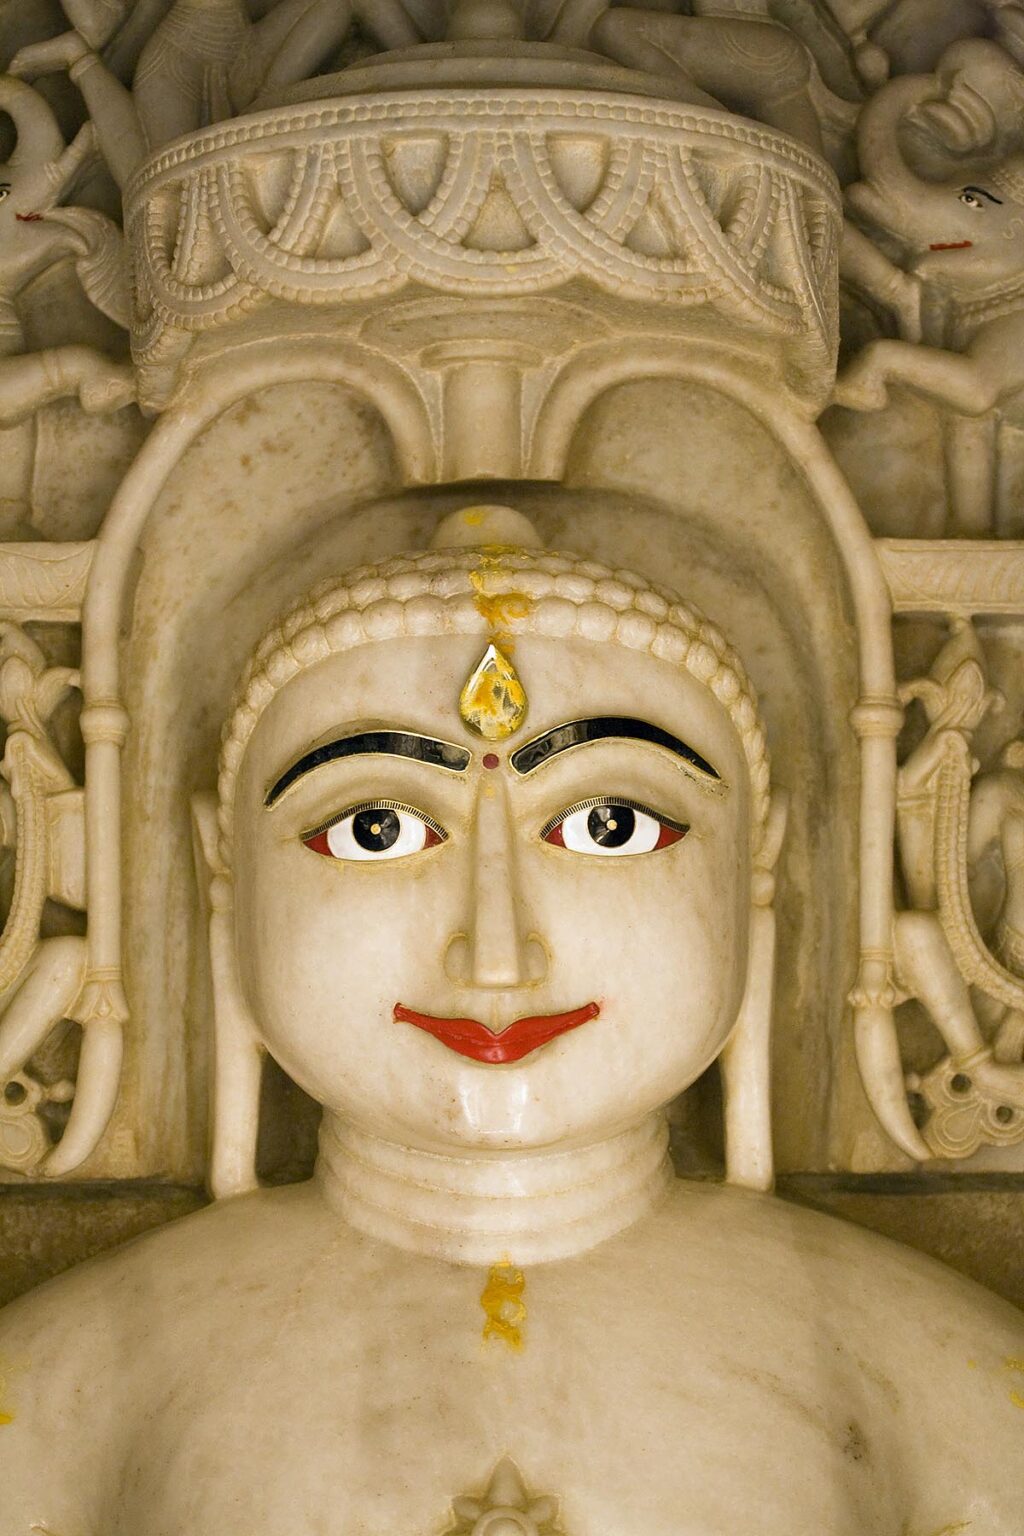 A hand carved WHITE MARBLE statue of MAHAVIRA in a JAIN TEMPLE inside JAISALMER FORT - RAJASTHAN, INDIA